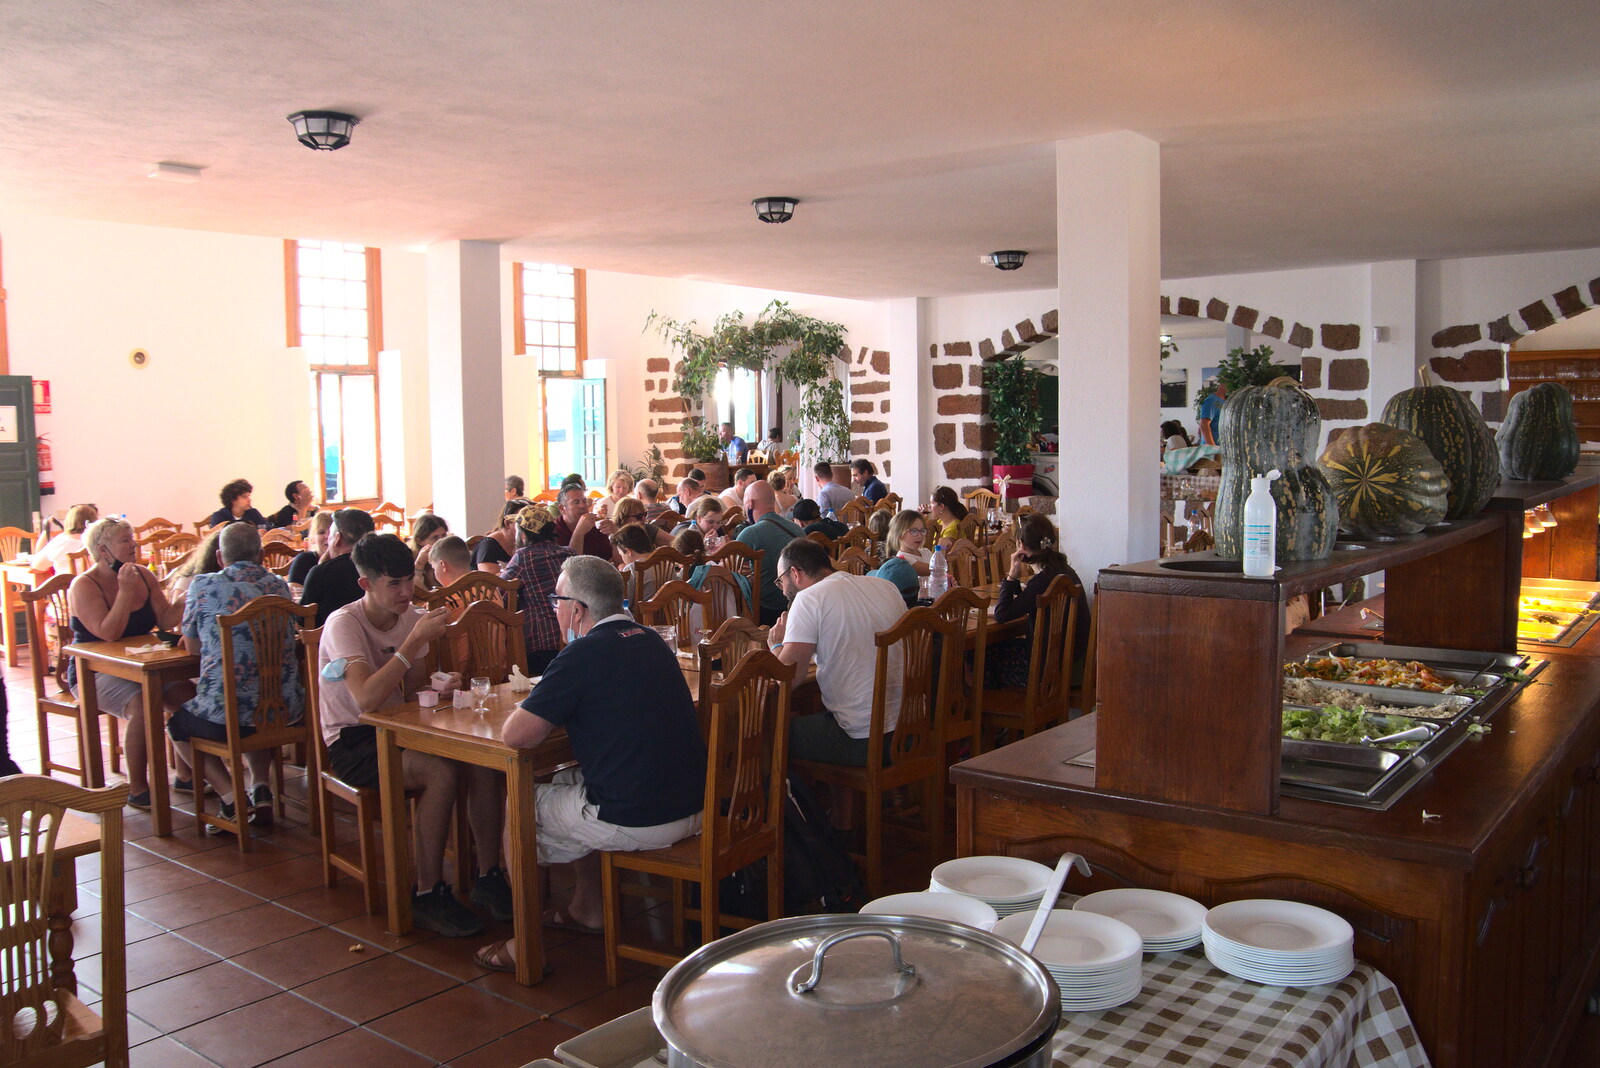 Another view of the packed canteen from The Volcanoes of Lanzarote, Canary Islands, Spain - 27th October 2021